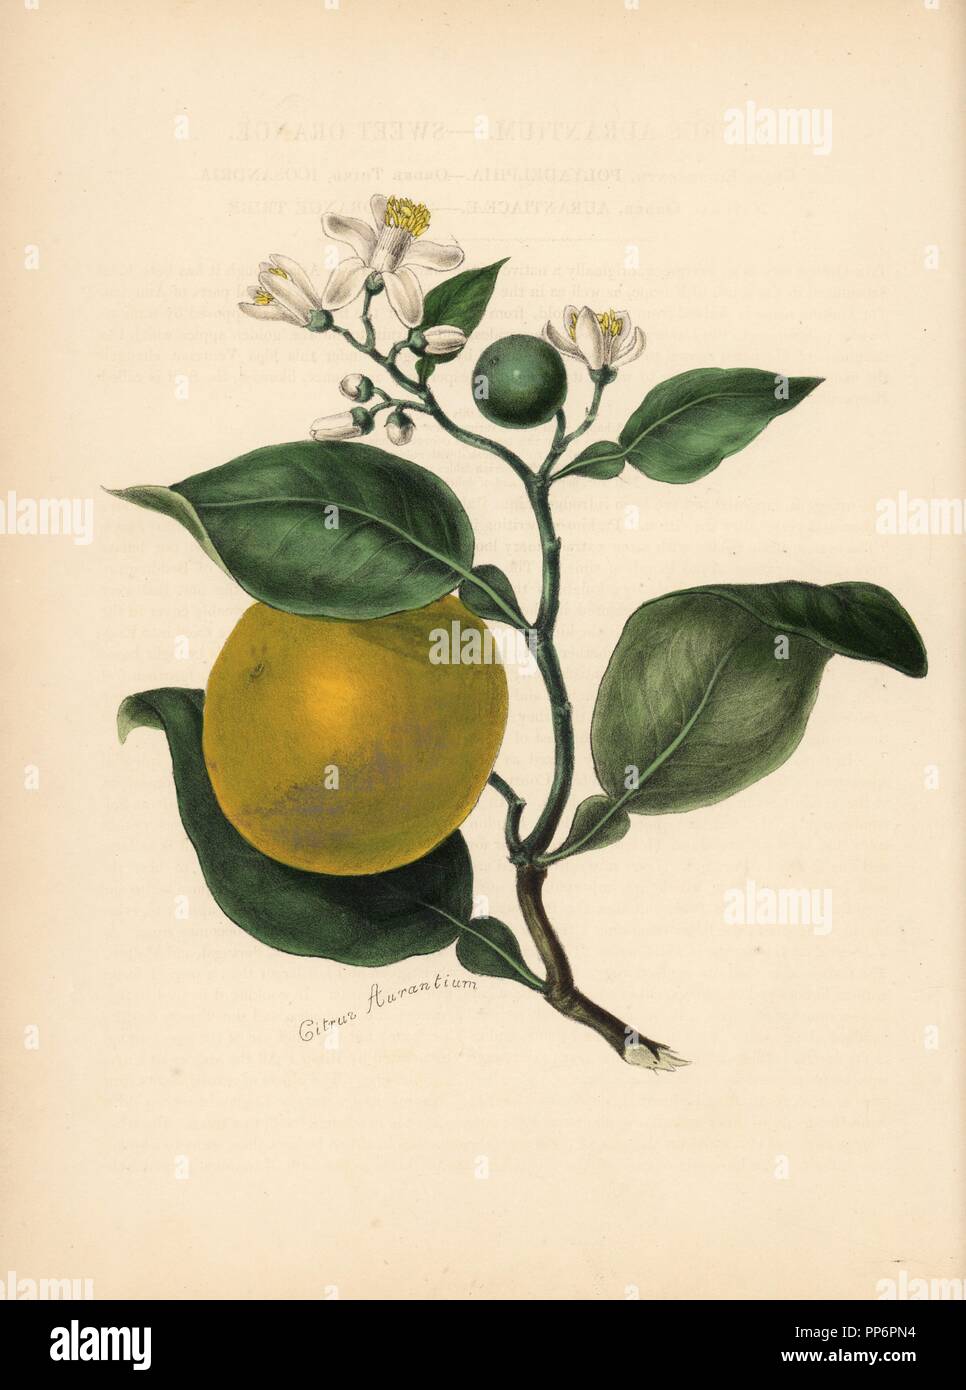 Sweet orange, Citrus aurantium. Handcoloured zincograph by Chabots drawn by Miss M. A. Burnett from her 'Plantae Utiliores: or Illustrations of Useful Plants,' Whittaker, London, 1842. Miss Burnett drew the botanical illustrations, but the text was chiefly by her late brother, British botanist Gilbert Thomas Burnett (1800-1835). Stock Photo